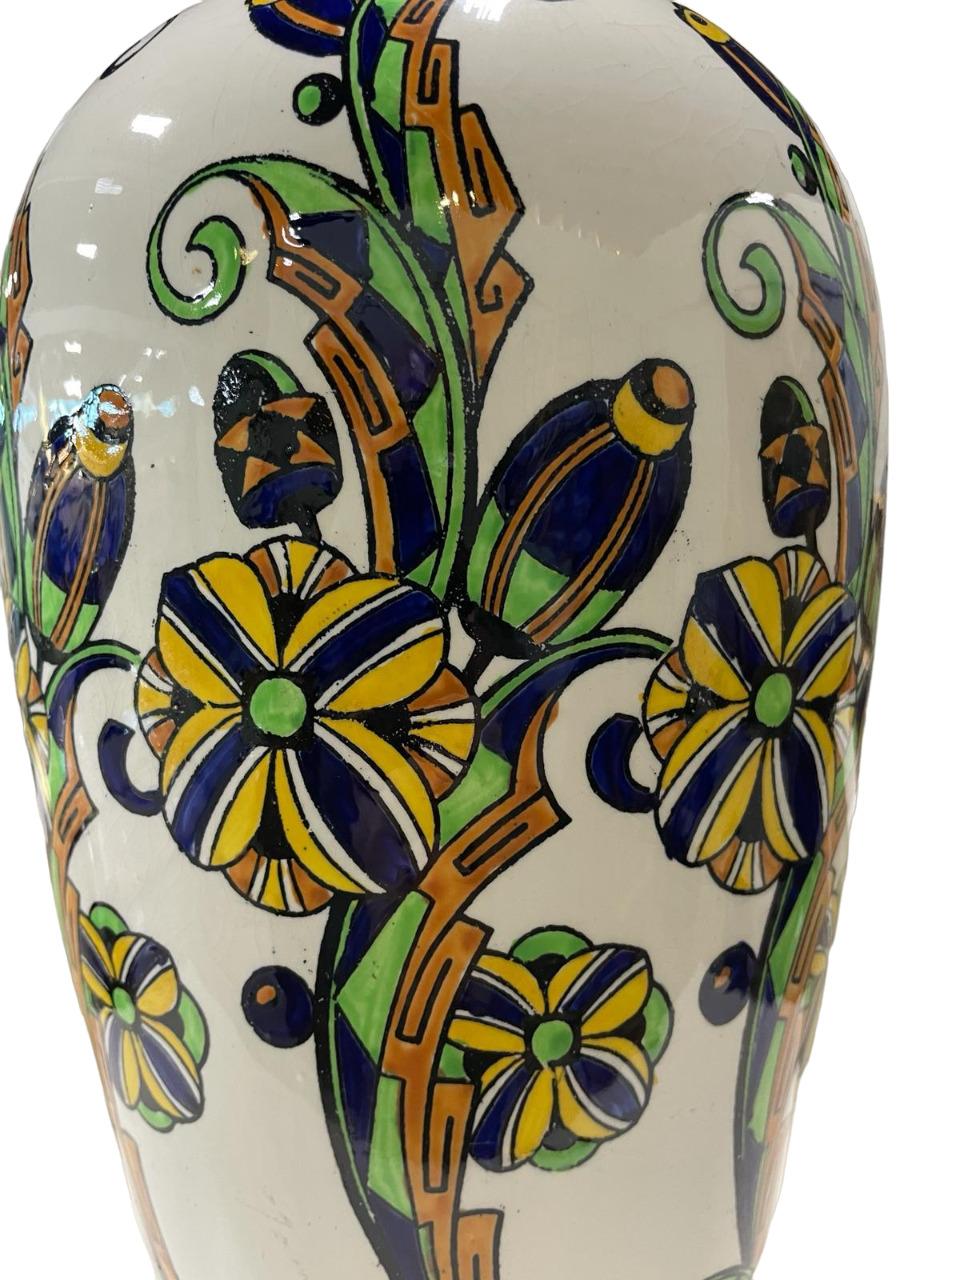 ART DECO LARGE Charles Catteau for Boch Keramis Vase circa 1927 For Sale 5